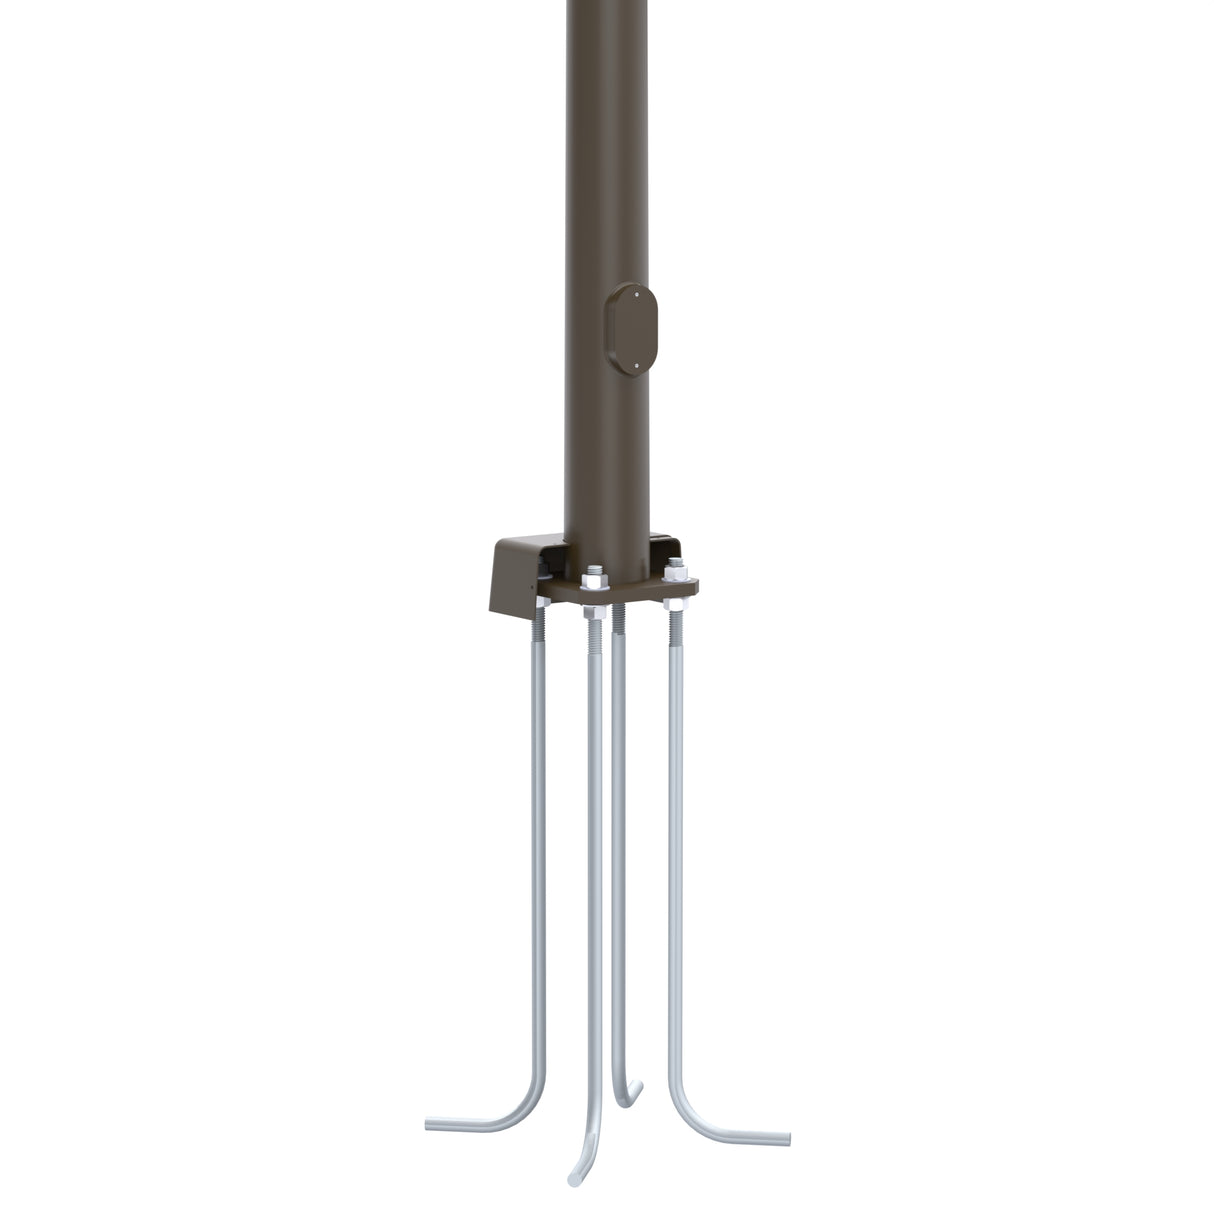 60' Tall x 13" Base OD x 4.8" Top OD x 7 & 11ga Thick, Round Tapered Steel, Anchor Base Light Pole